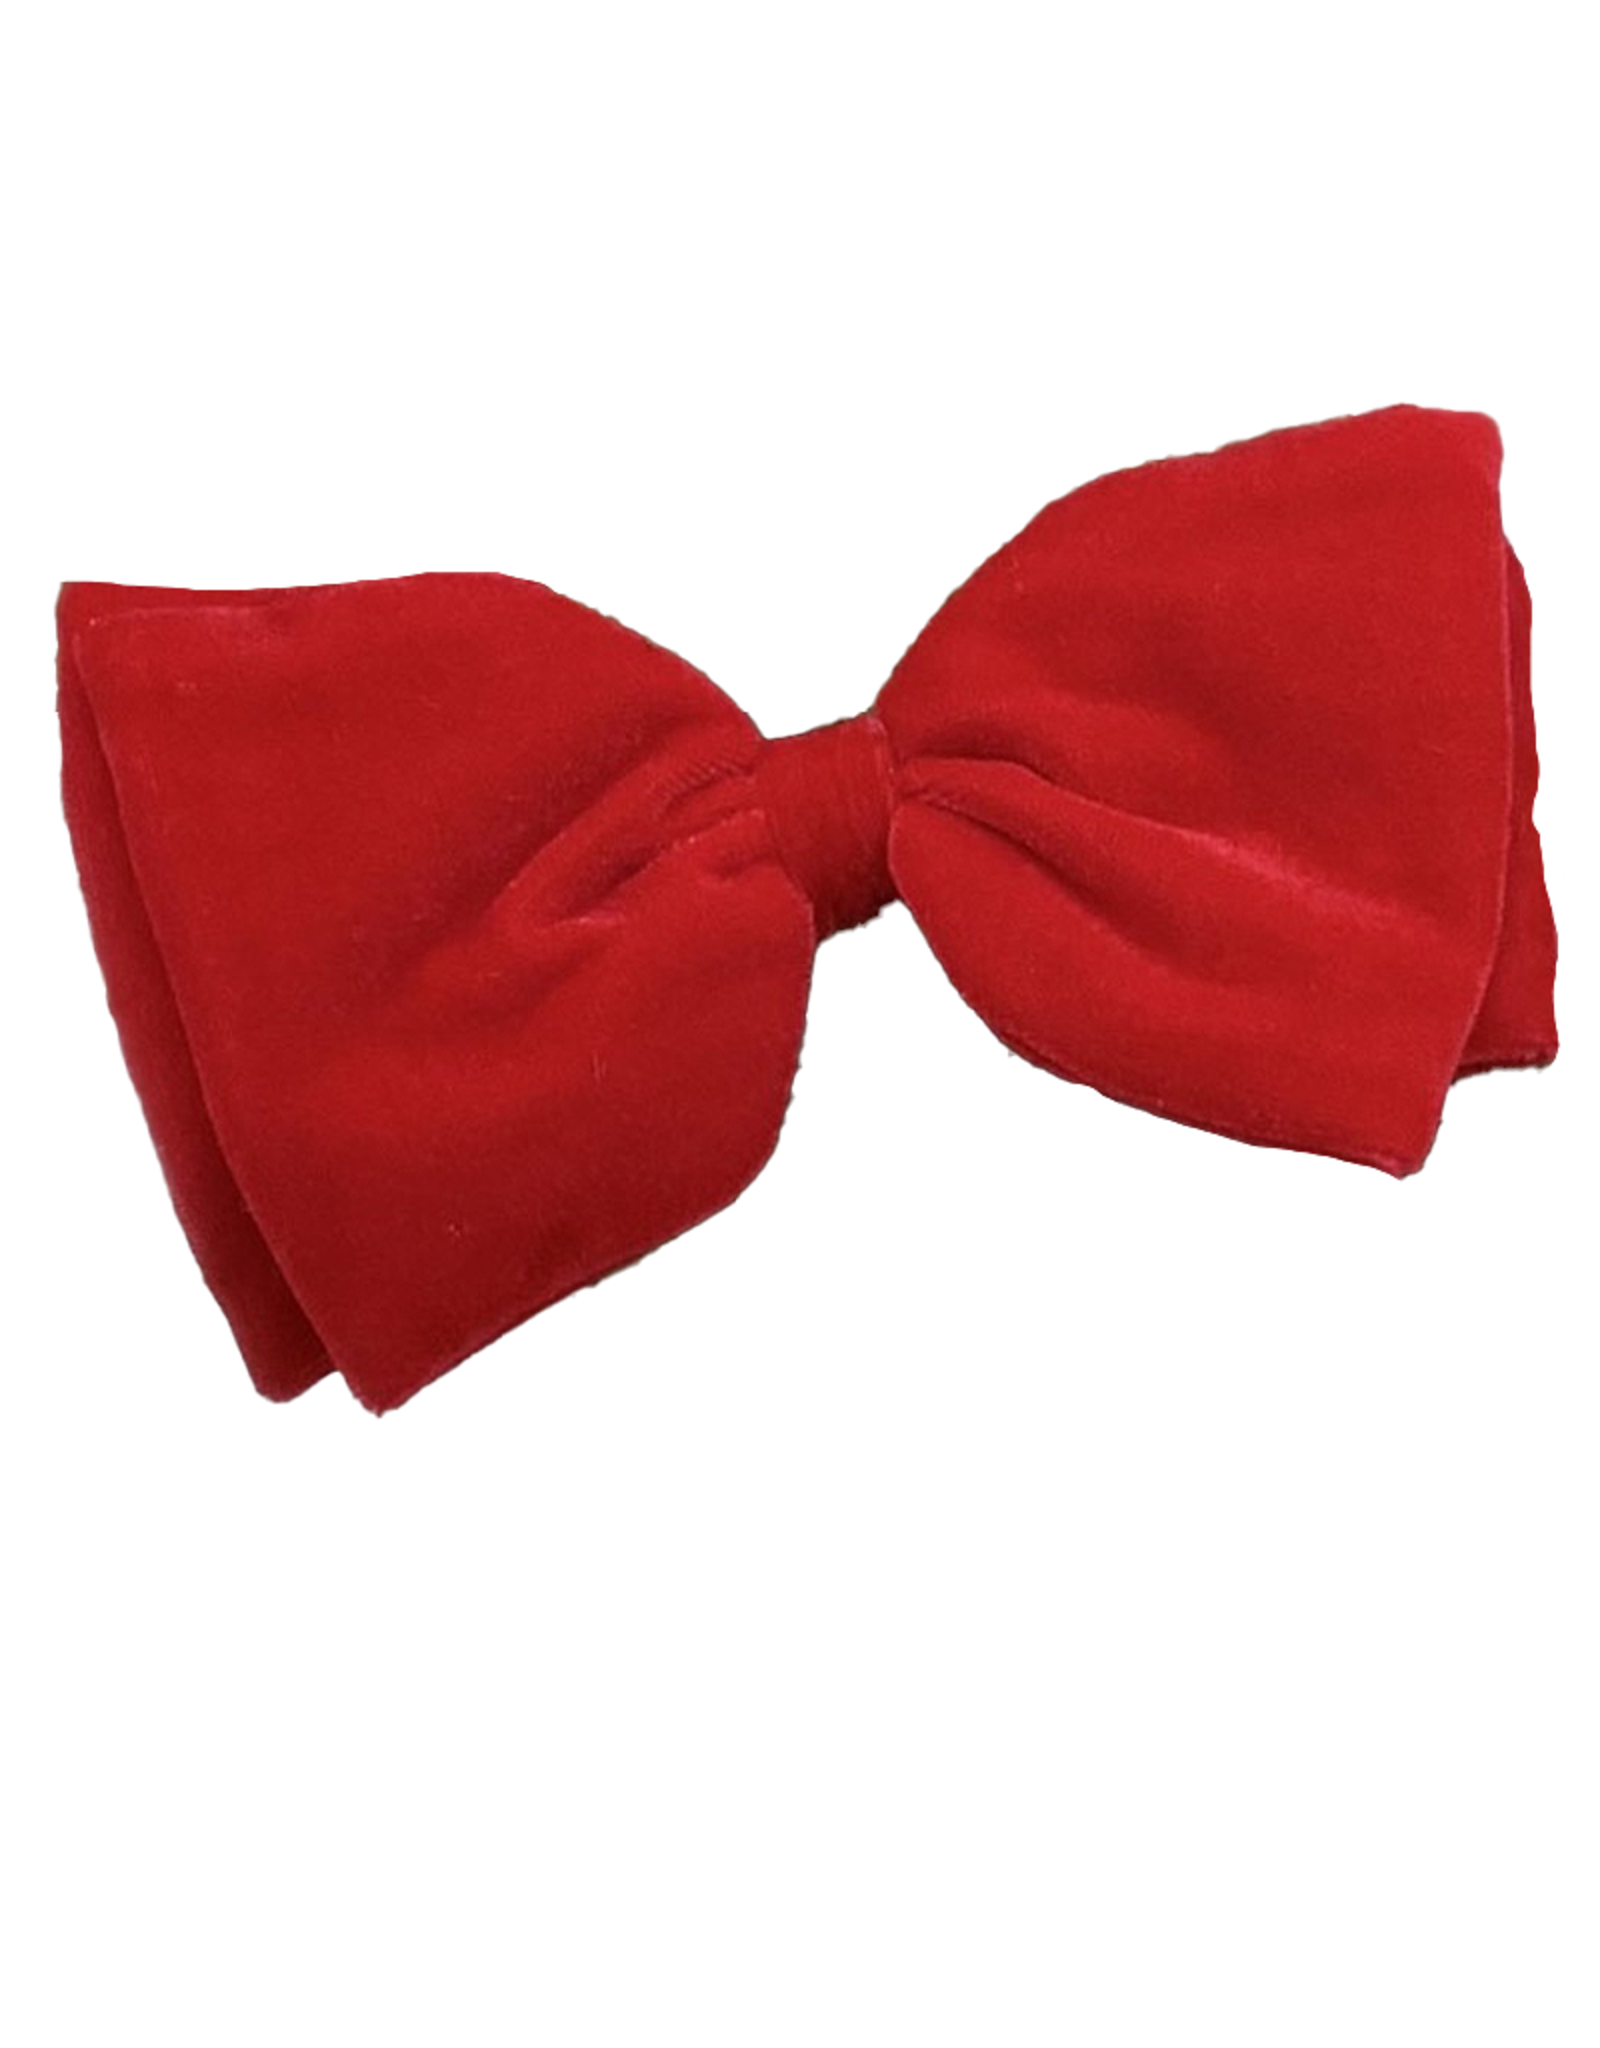 D Stevens Hot Red Velvet Bow With Expandable Loop 6 Inch